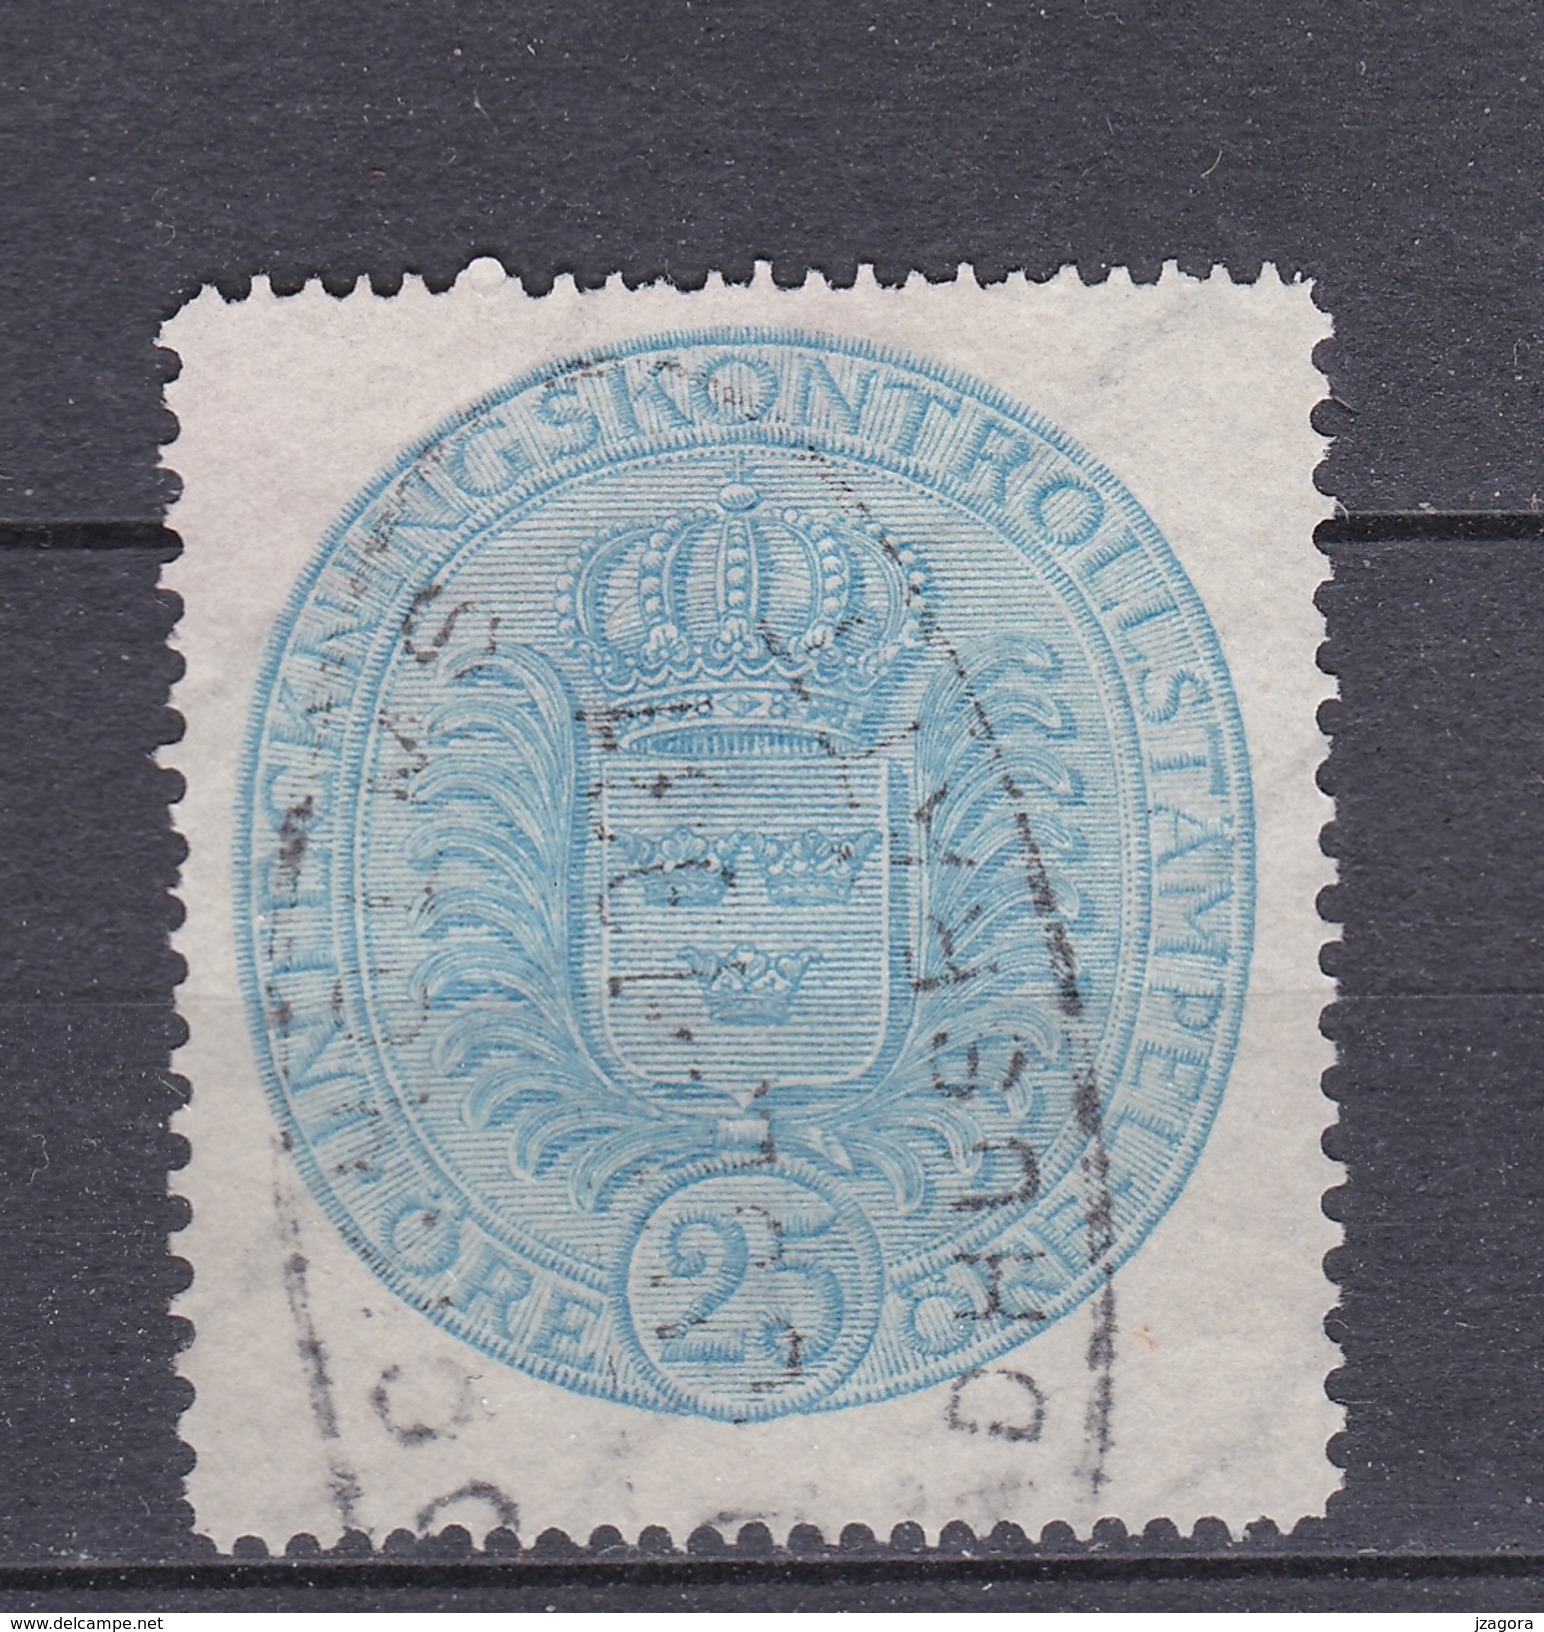 OLD REVENUE STAMP STEUERMARKE TIMBRE FISCAL  MORTGAGE CONTROLL - SWEDEN  -  25 ORE  HYPOTHEKEN HYPOTHÈQUES HIPOTECA - Revenue Stamps